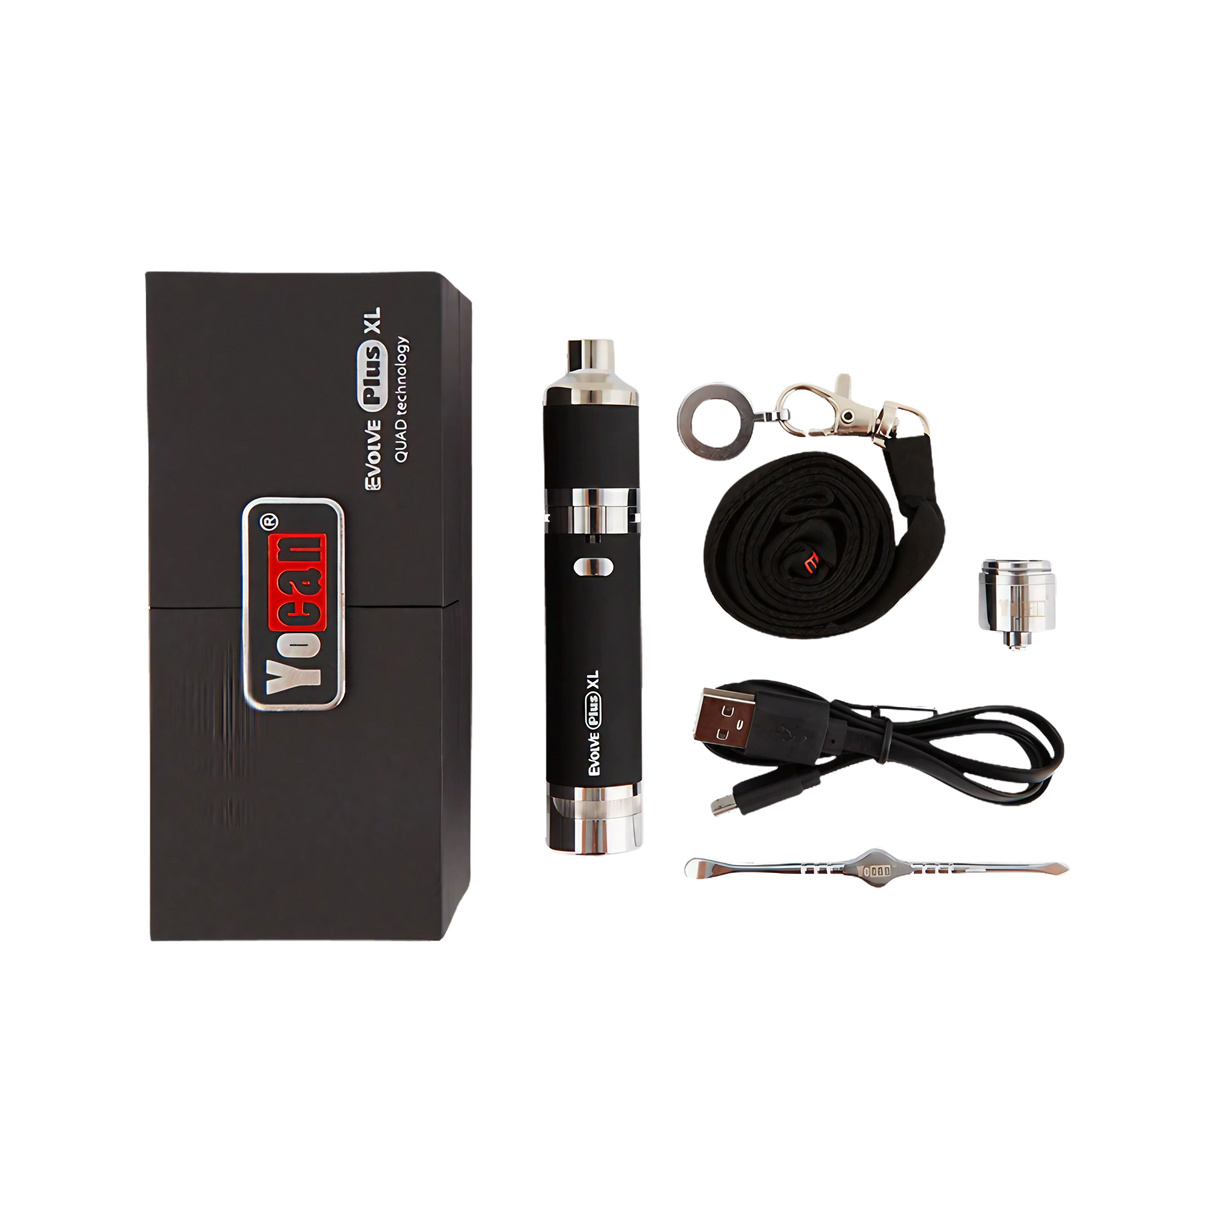 Yocan Evolve Plus XL Vaporizer in Black with Quartz Coil and USB Cable